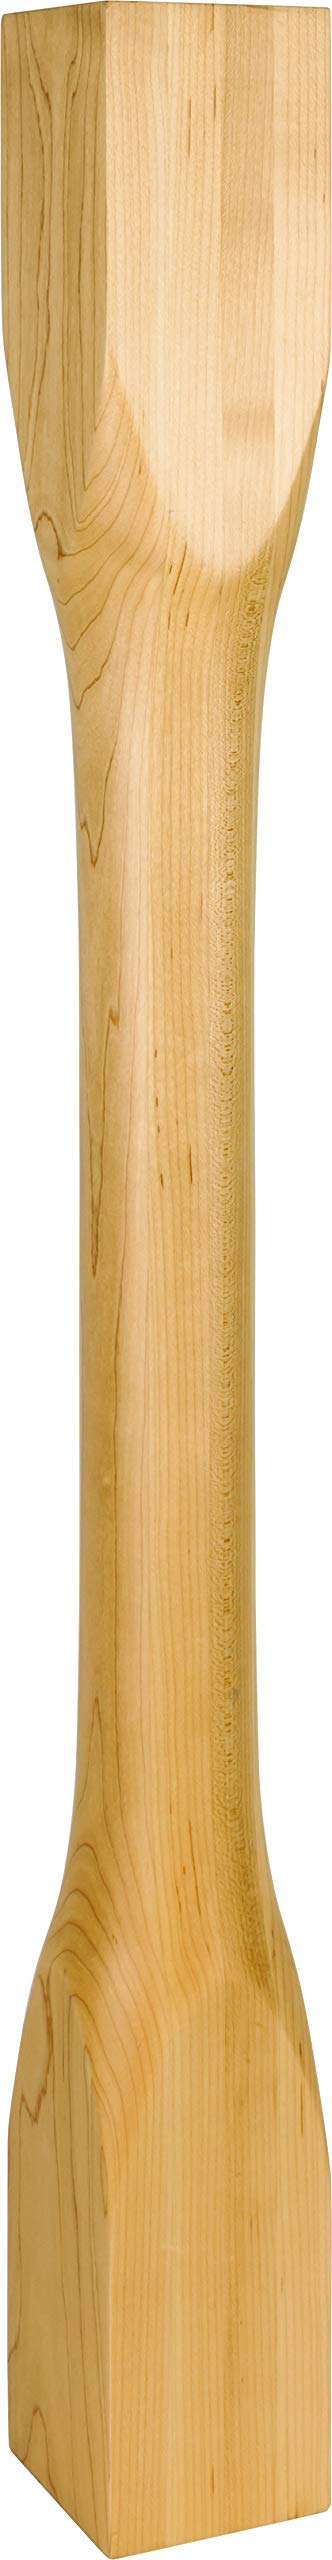 Hardware Resources P83-5-ALD 5" W x 5" D x 35-1/2" H Alder Cathedral Turned Post